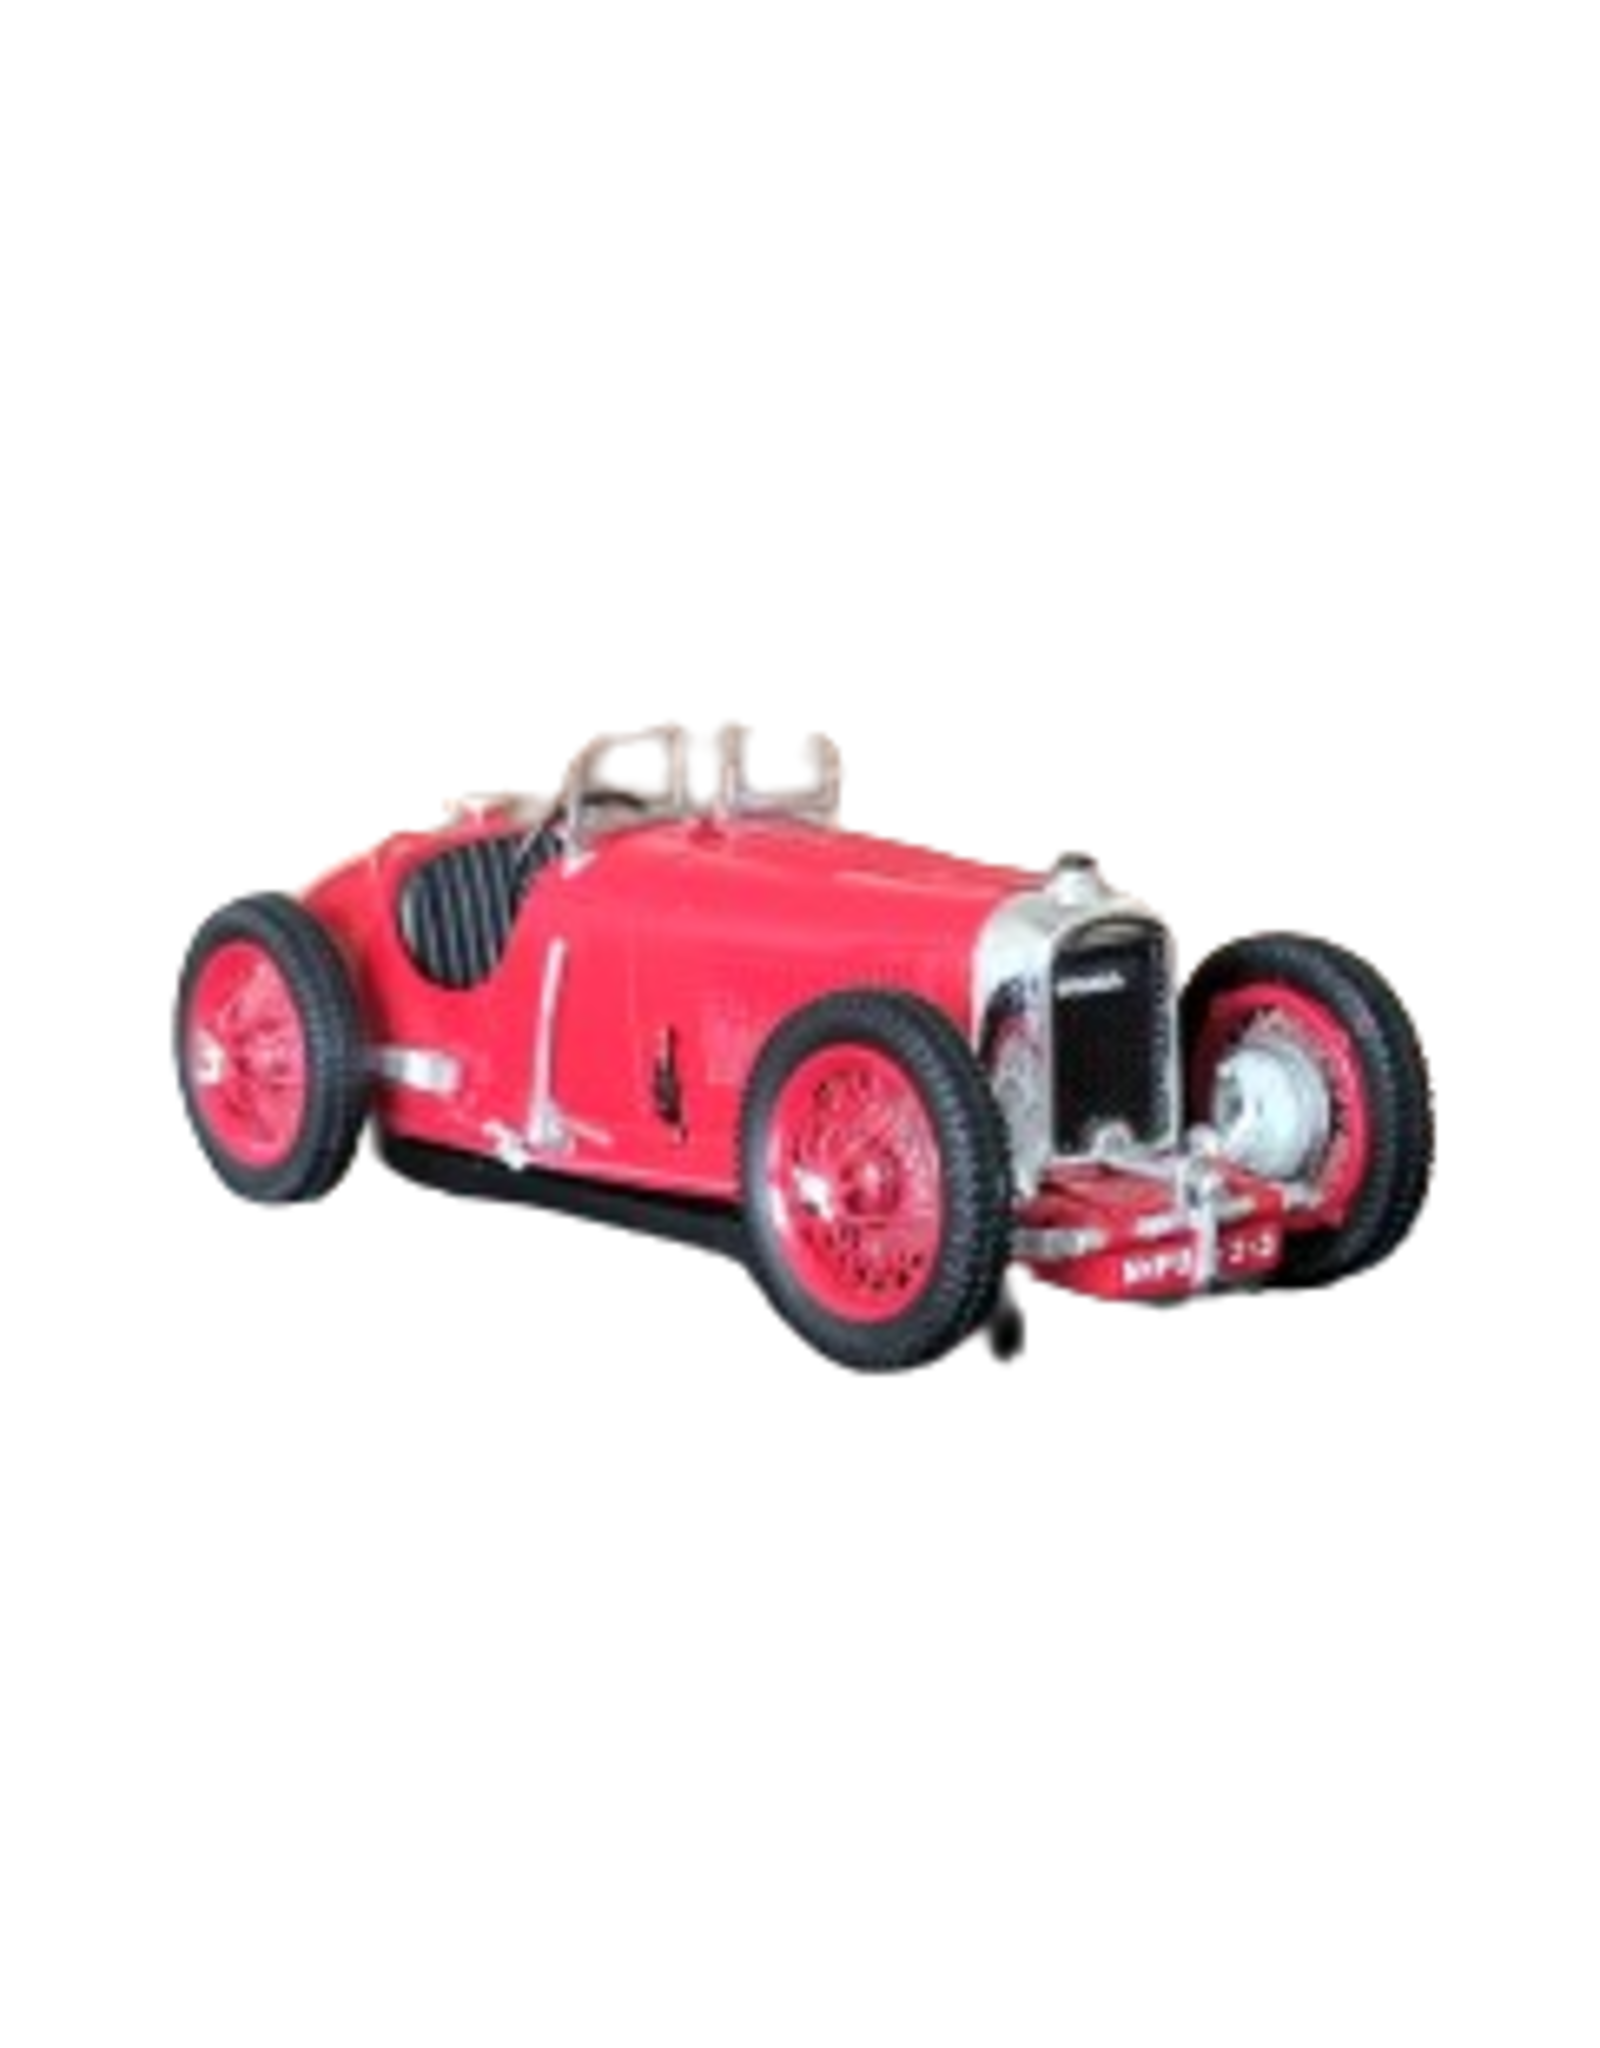 Amilcar Amilcar C6 Racer (1928)red